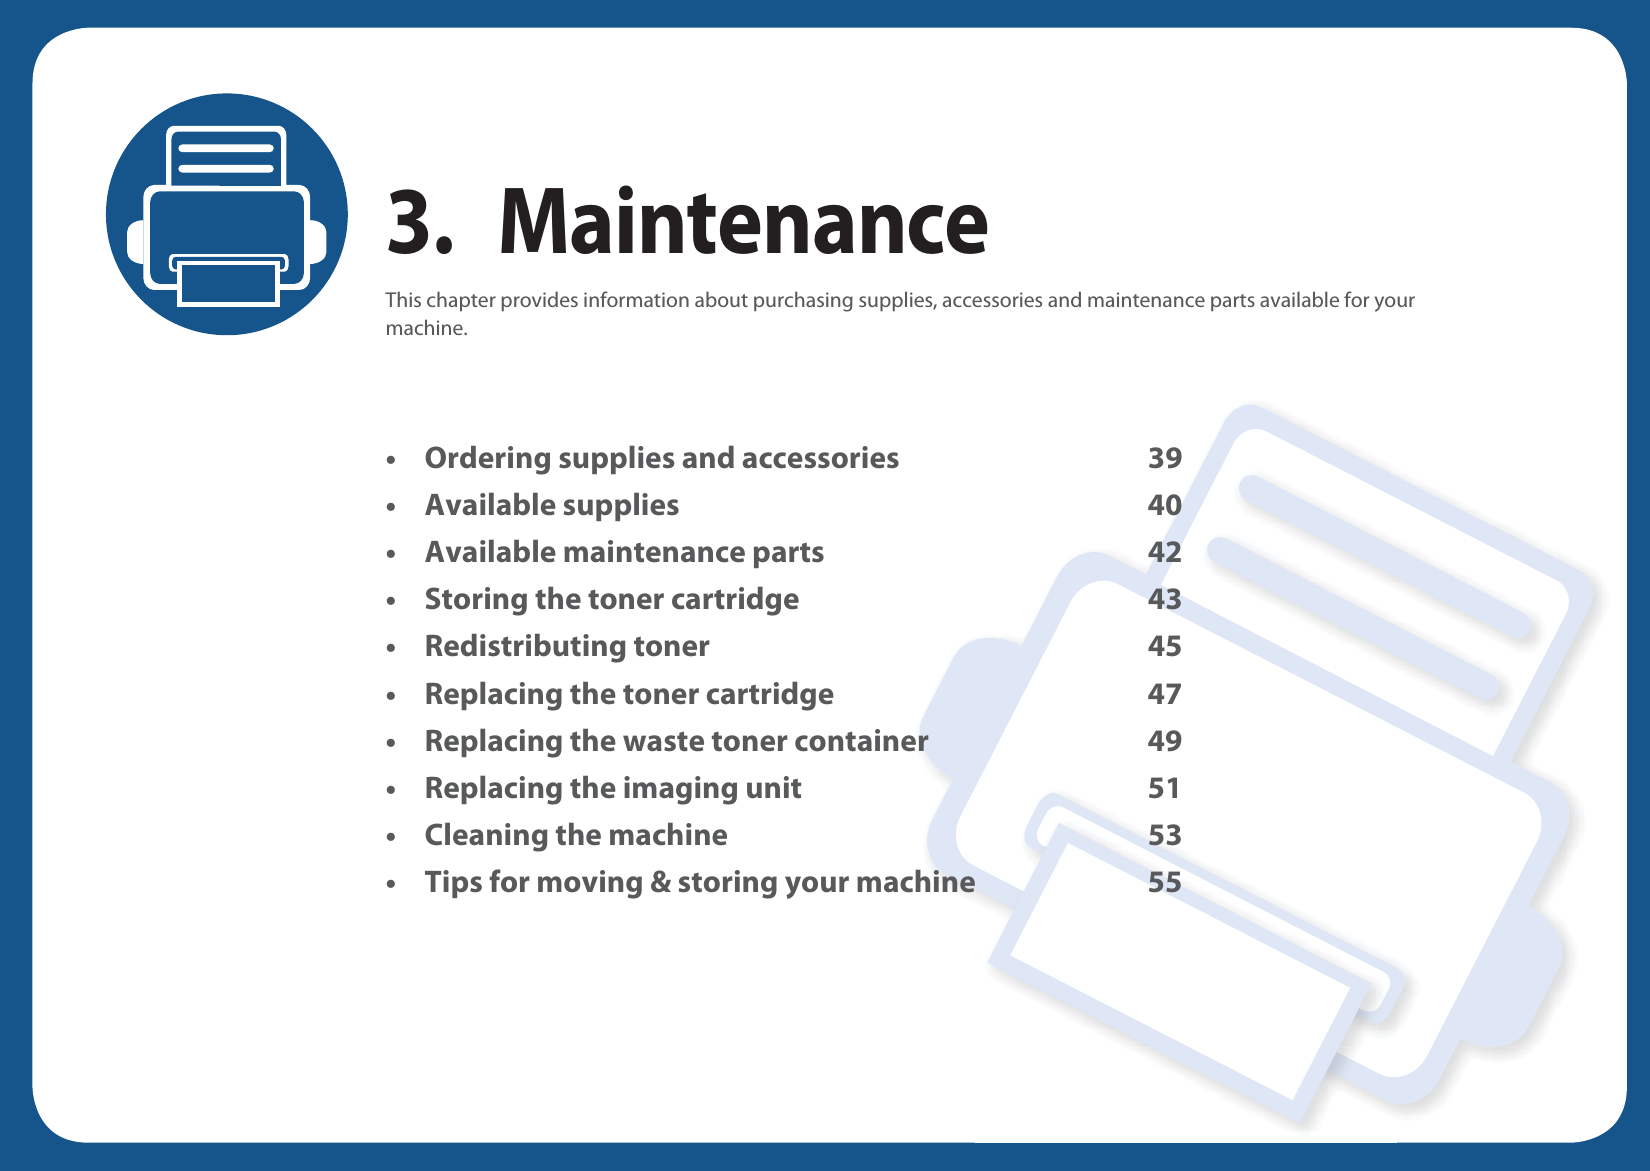 3. MaintenanceThis chapter provides information about purchasing supplies, accessories and maintenance parts available for your machine.• Ordering supplies and accessories 39• Available supplies 40• Available maintenance parts 42• Storing the toner cartridge 43• Redistributing toner 45• Replacing the toner cartridge 47• Replacing the waste toner container 49• Replacing the imaging unit 51• Cleaning the machine 53• Tips for moving &amp; storing your machine 55